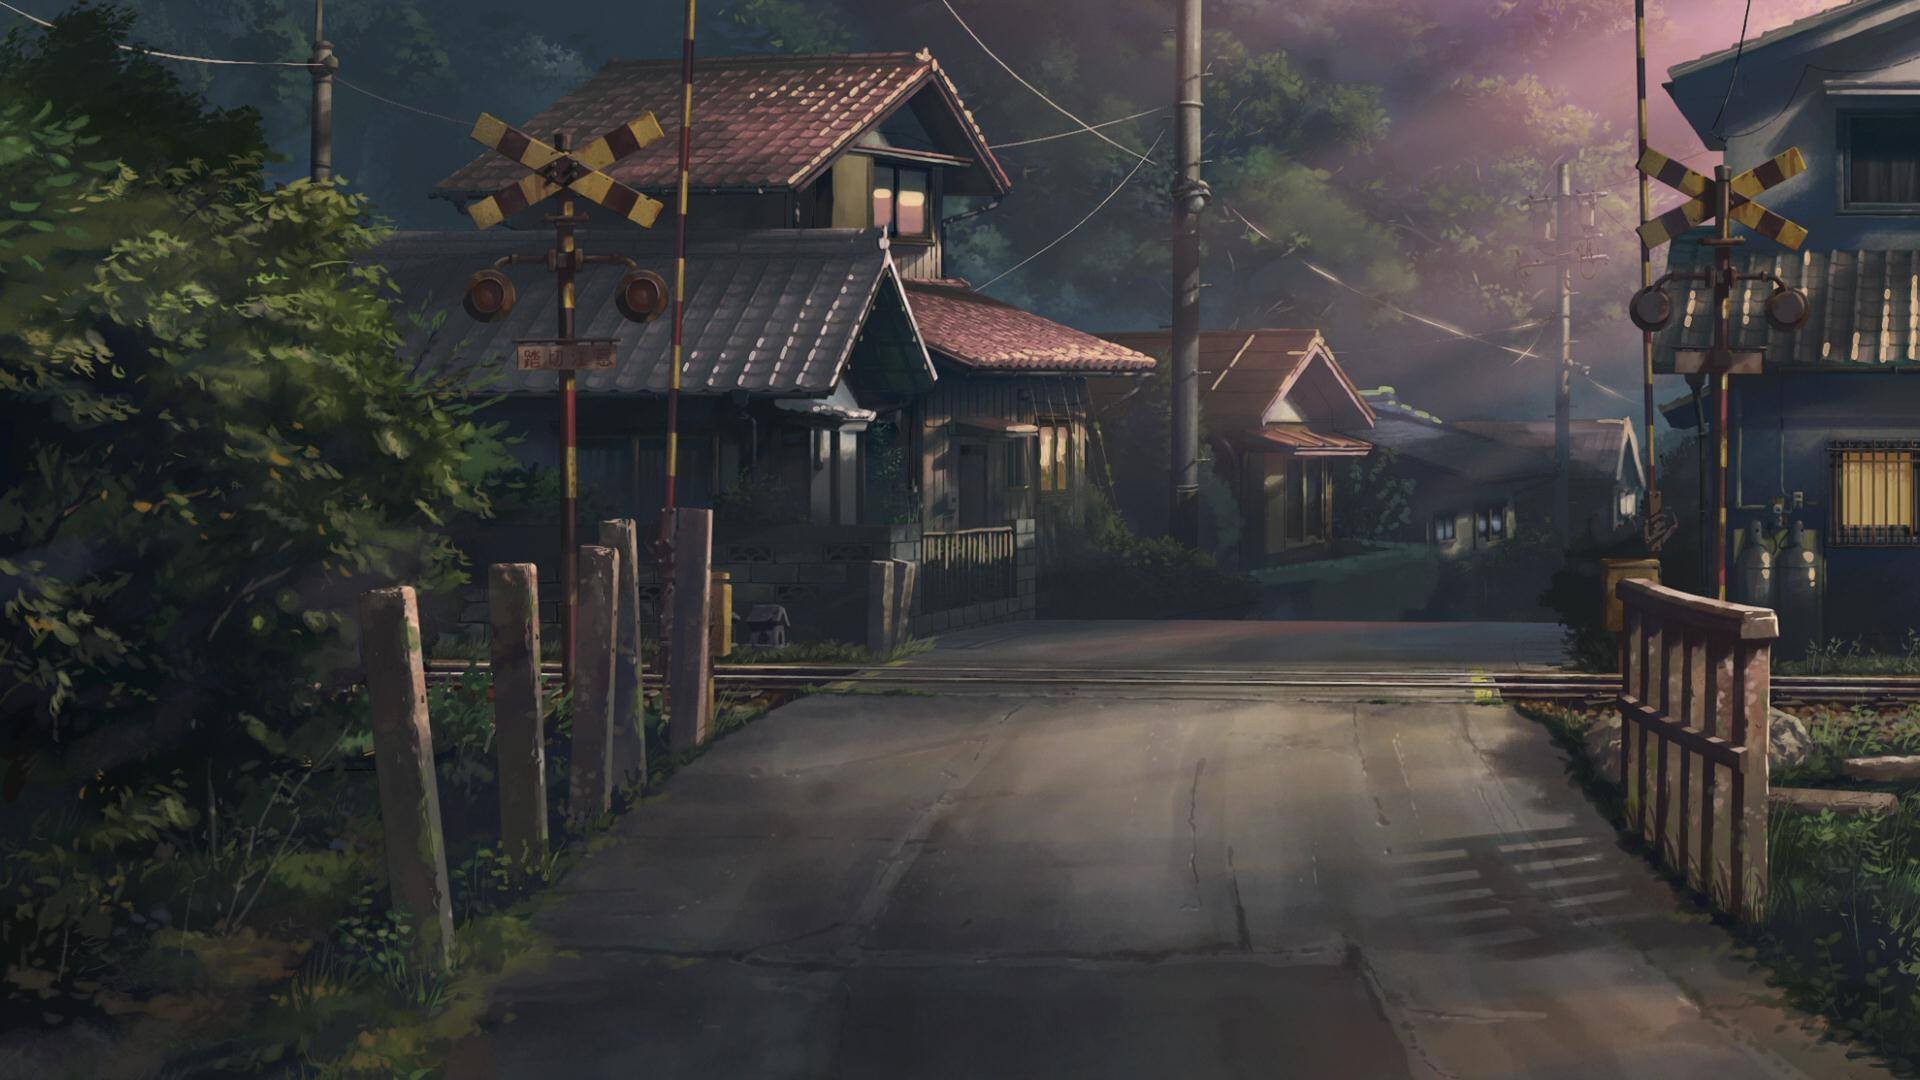 Children Who Chase Lost Voices Artwork Japan Road Railway Crossing Drawing Anime Village 1920x1080 UHD Wallpaper. Walldump HD and UHD Wallpaper